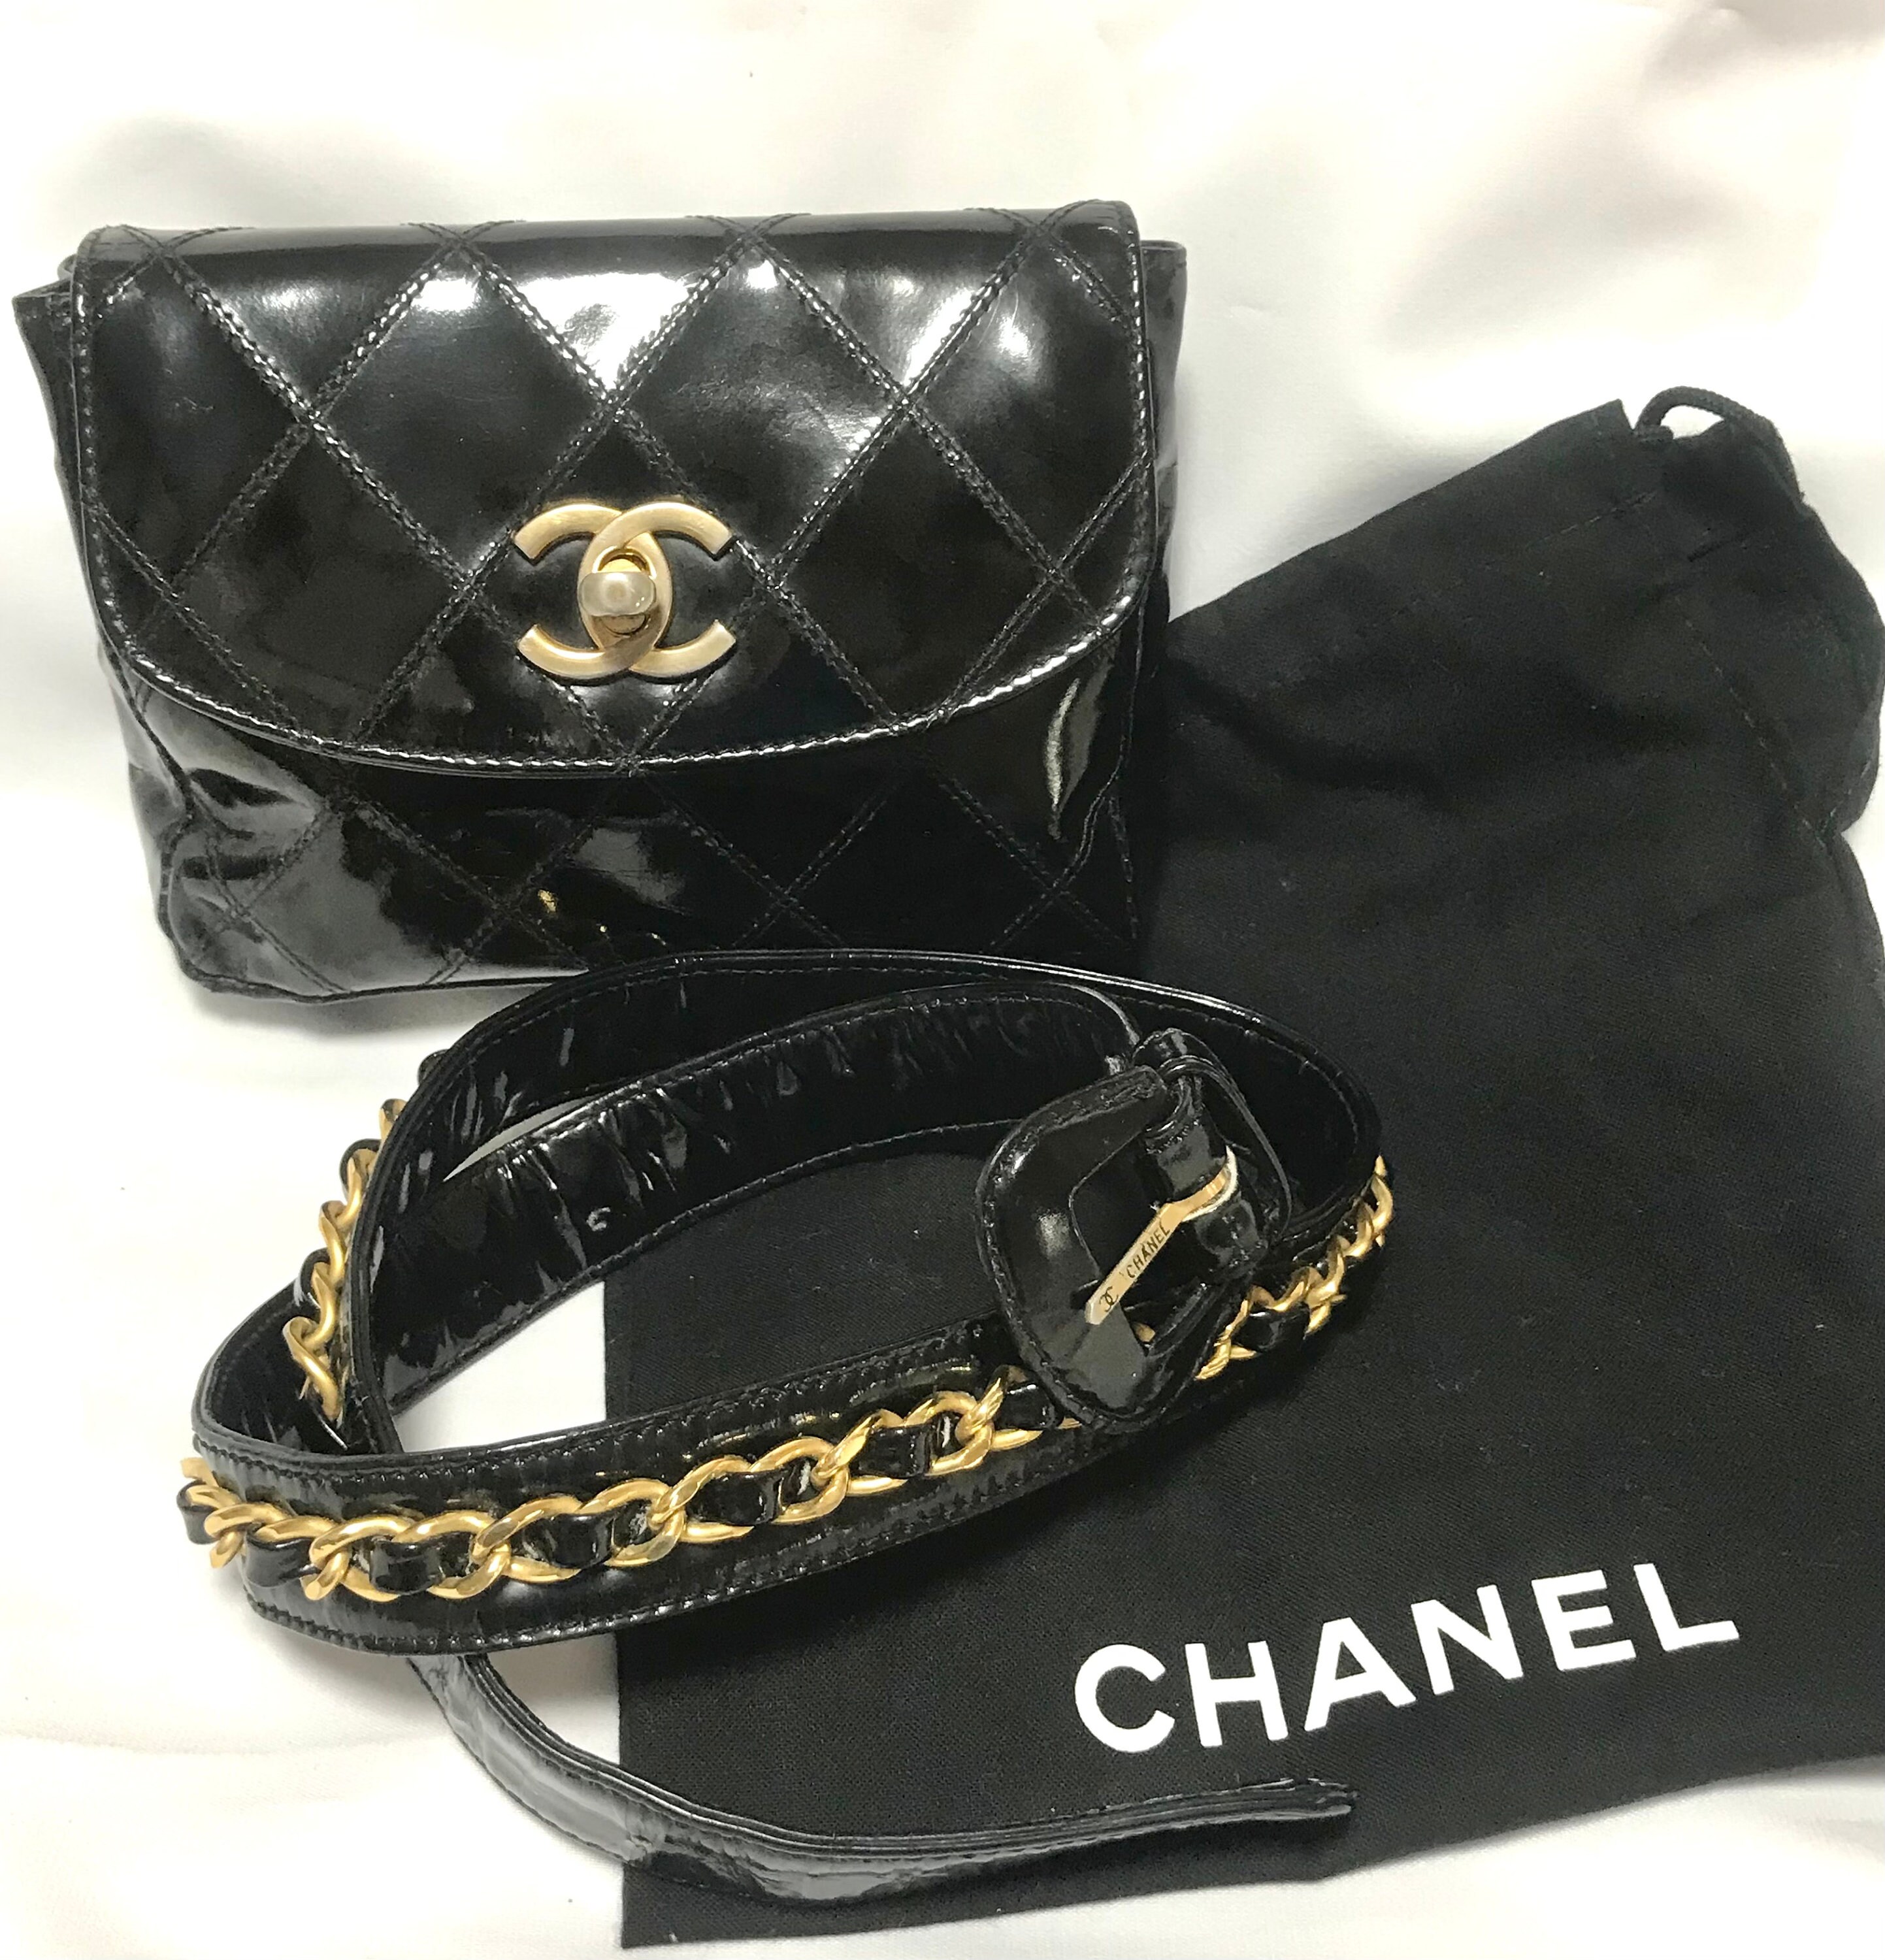 chanel clutch auth